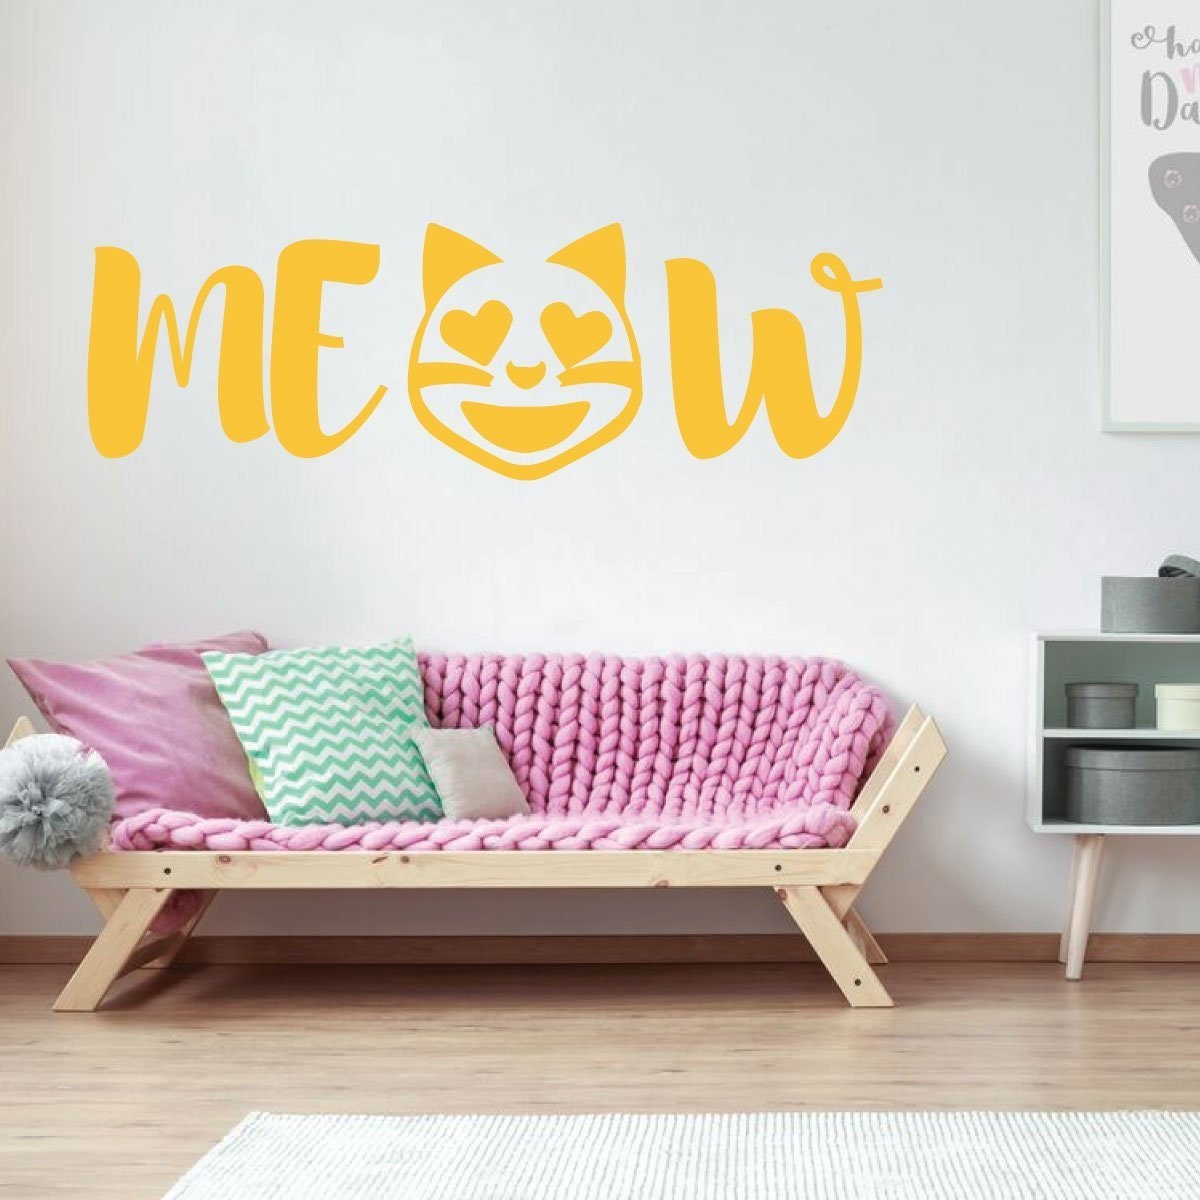 Emoji Wall Decal Meow Cat Vinyl Art Decorations for Teens - Etsy